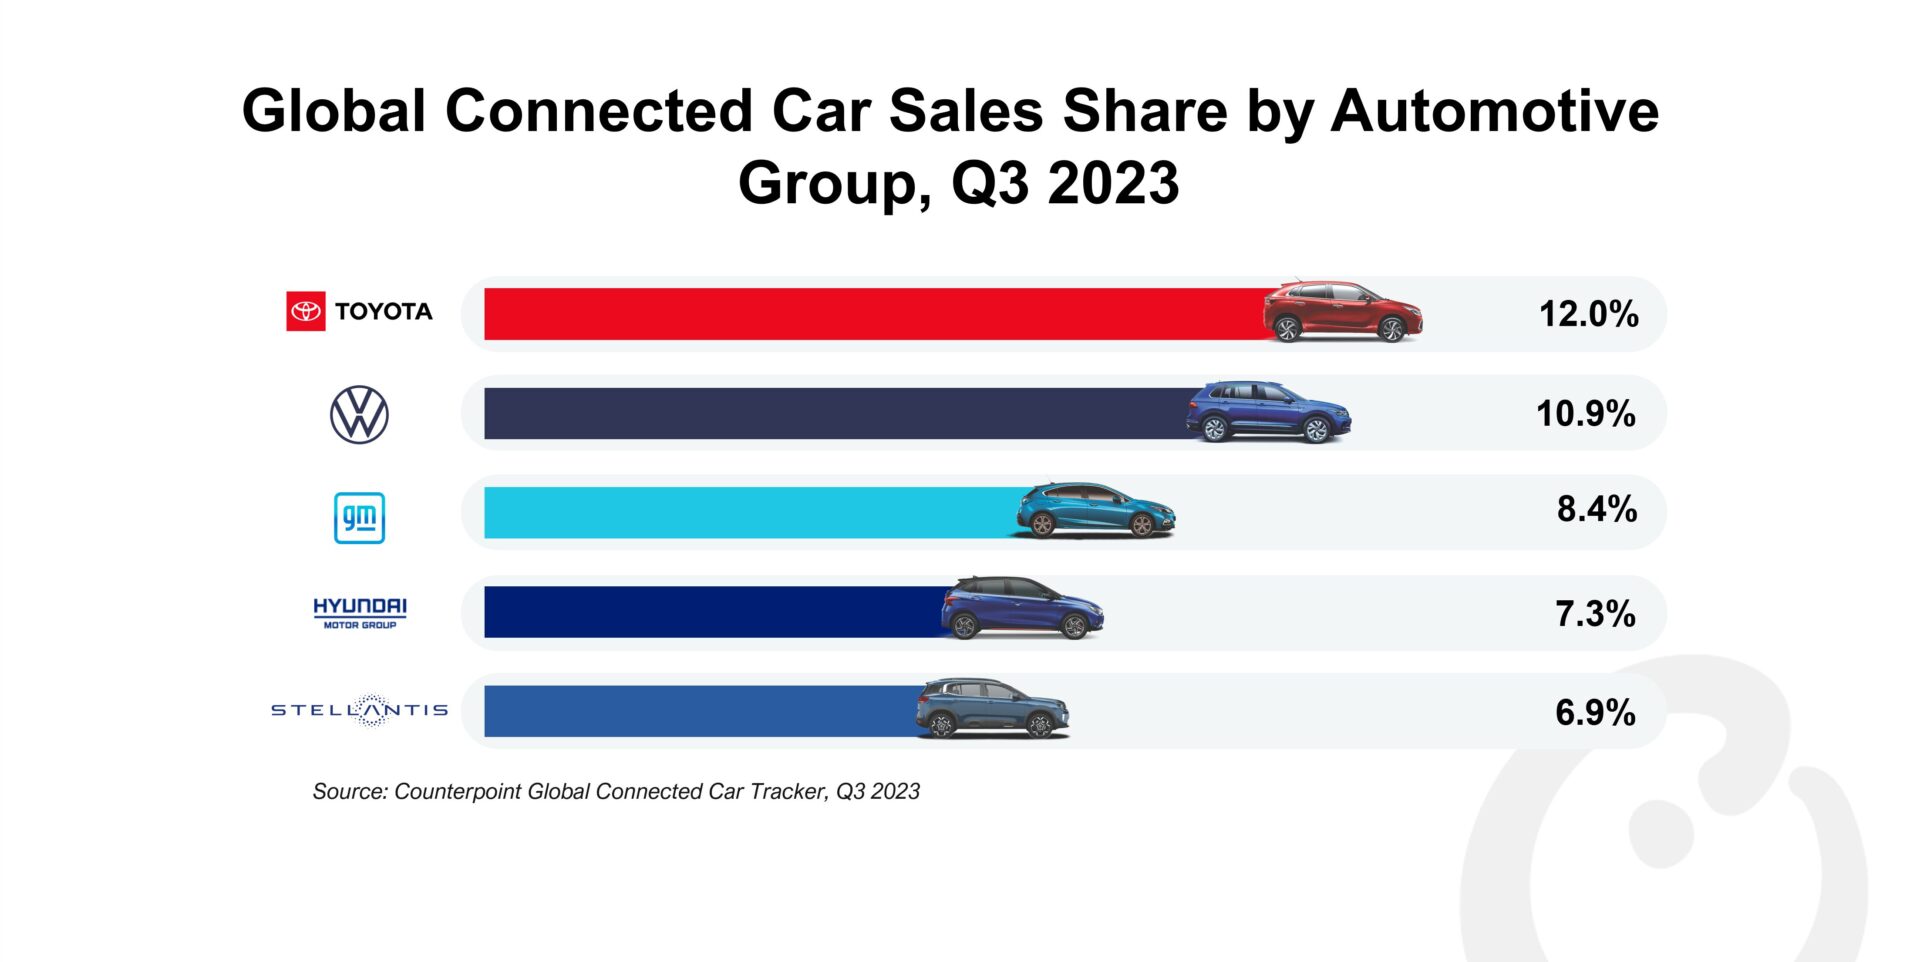 Two-thirds of Cars Sold in Q3 2023 Featured Embedded Connectivity